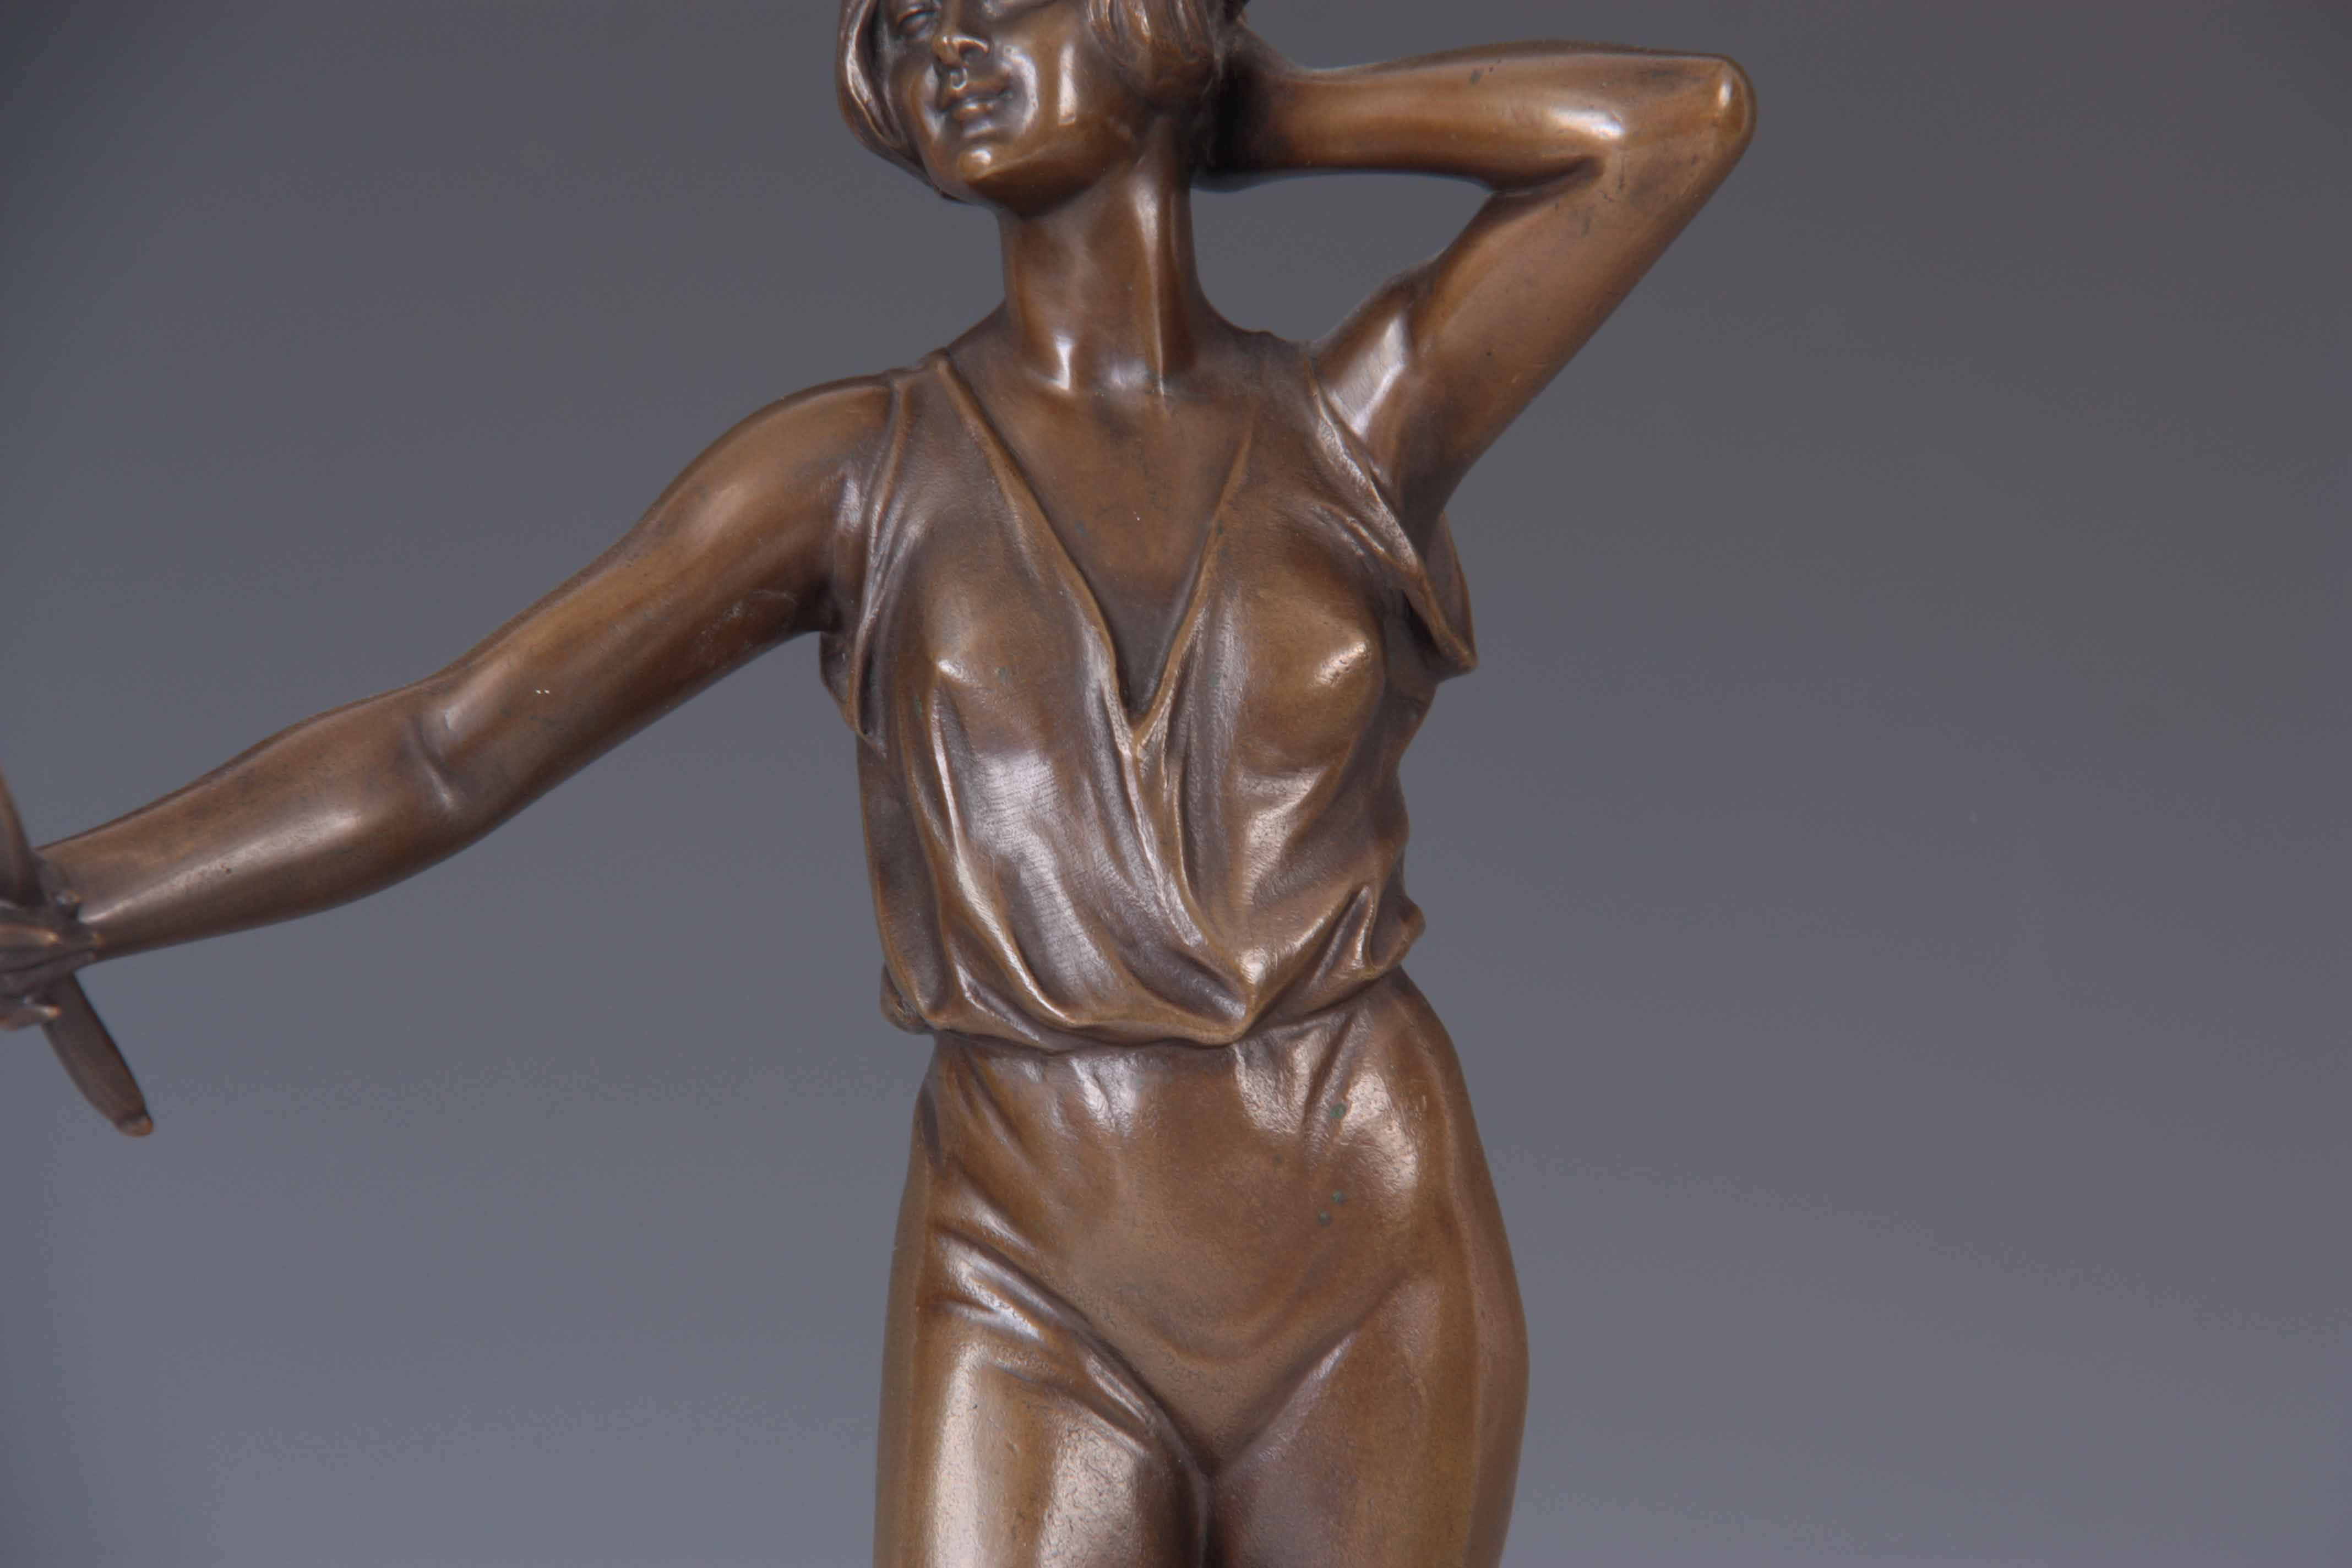 BRUNO ZACH. AN EARLY 20TH CENTURY AUSTRIAN BRONZE SCULPTURE modelled as a young woman looking into a - Image 3 of 9